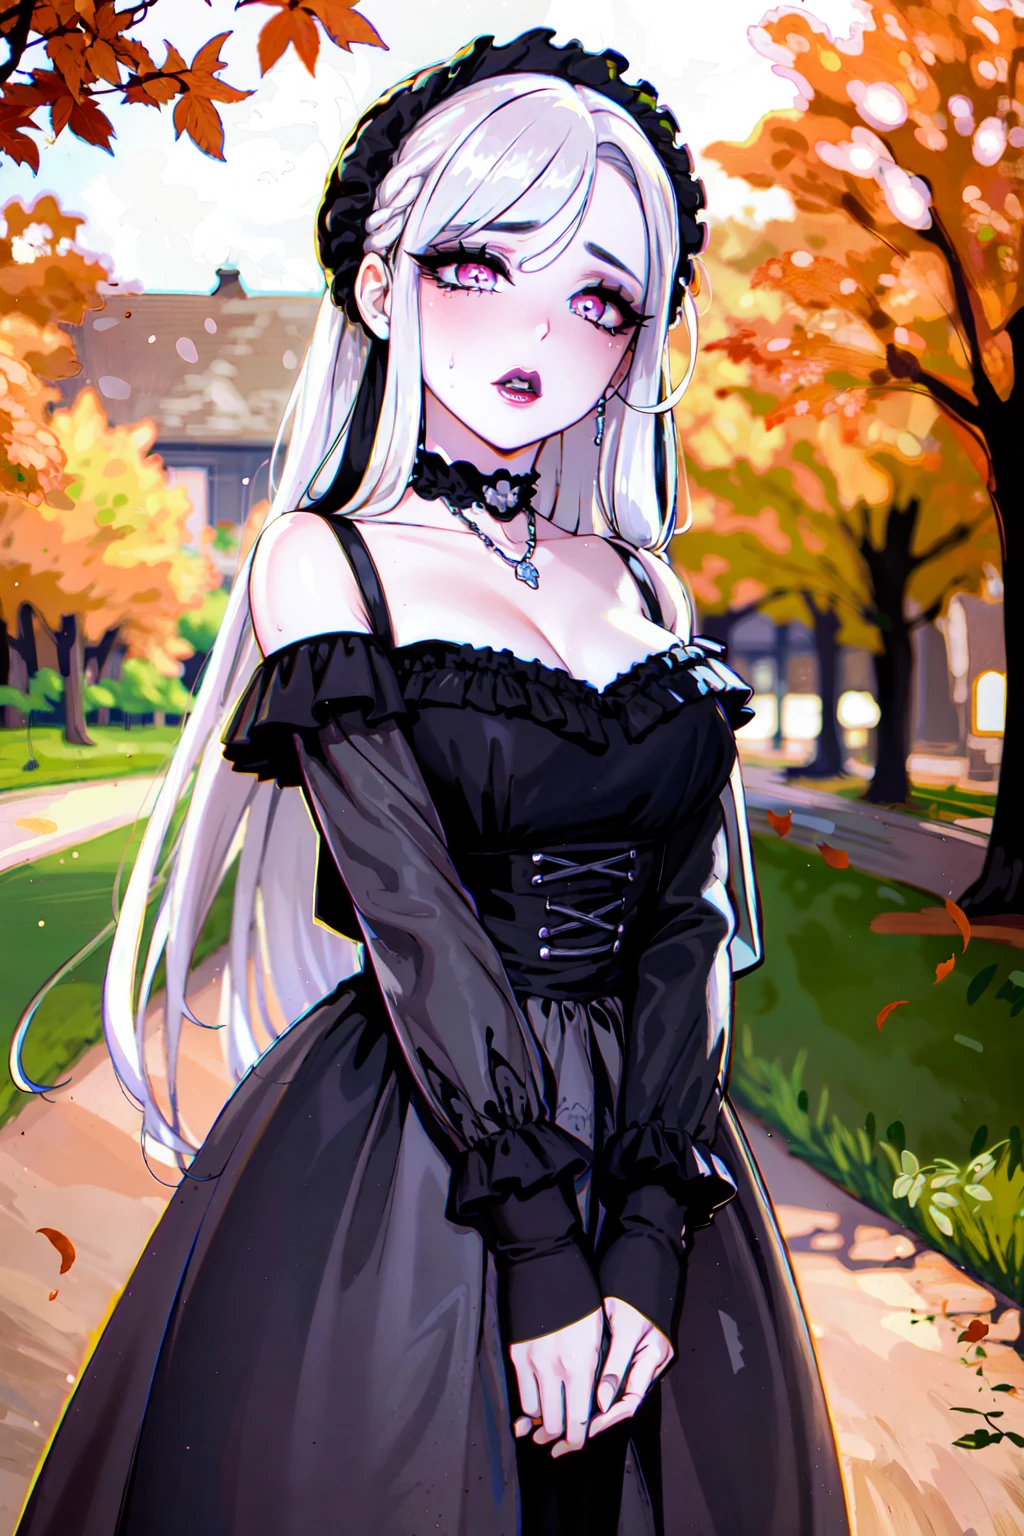 (masterpiece:1.2), (best quality:1.2), perfect eyes, perfect face, perfect lighting, 1girl, mature female gothgal standing, long hair, intricate hairdo, makeup, black lips, thick eyelashes, wearing a gothgal outfit, black and (white:1.2) dress, frills, ribbons, puffy sleeves, bare shoulders, lacey choker, jewelry, peaceful, quiet, chill, detailed outdoor background, beautiful landscape, fantasy, autumn, warm colors, falling leaves  